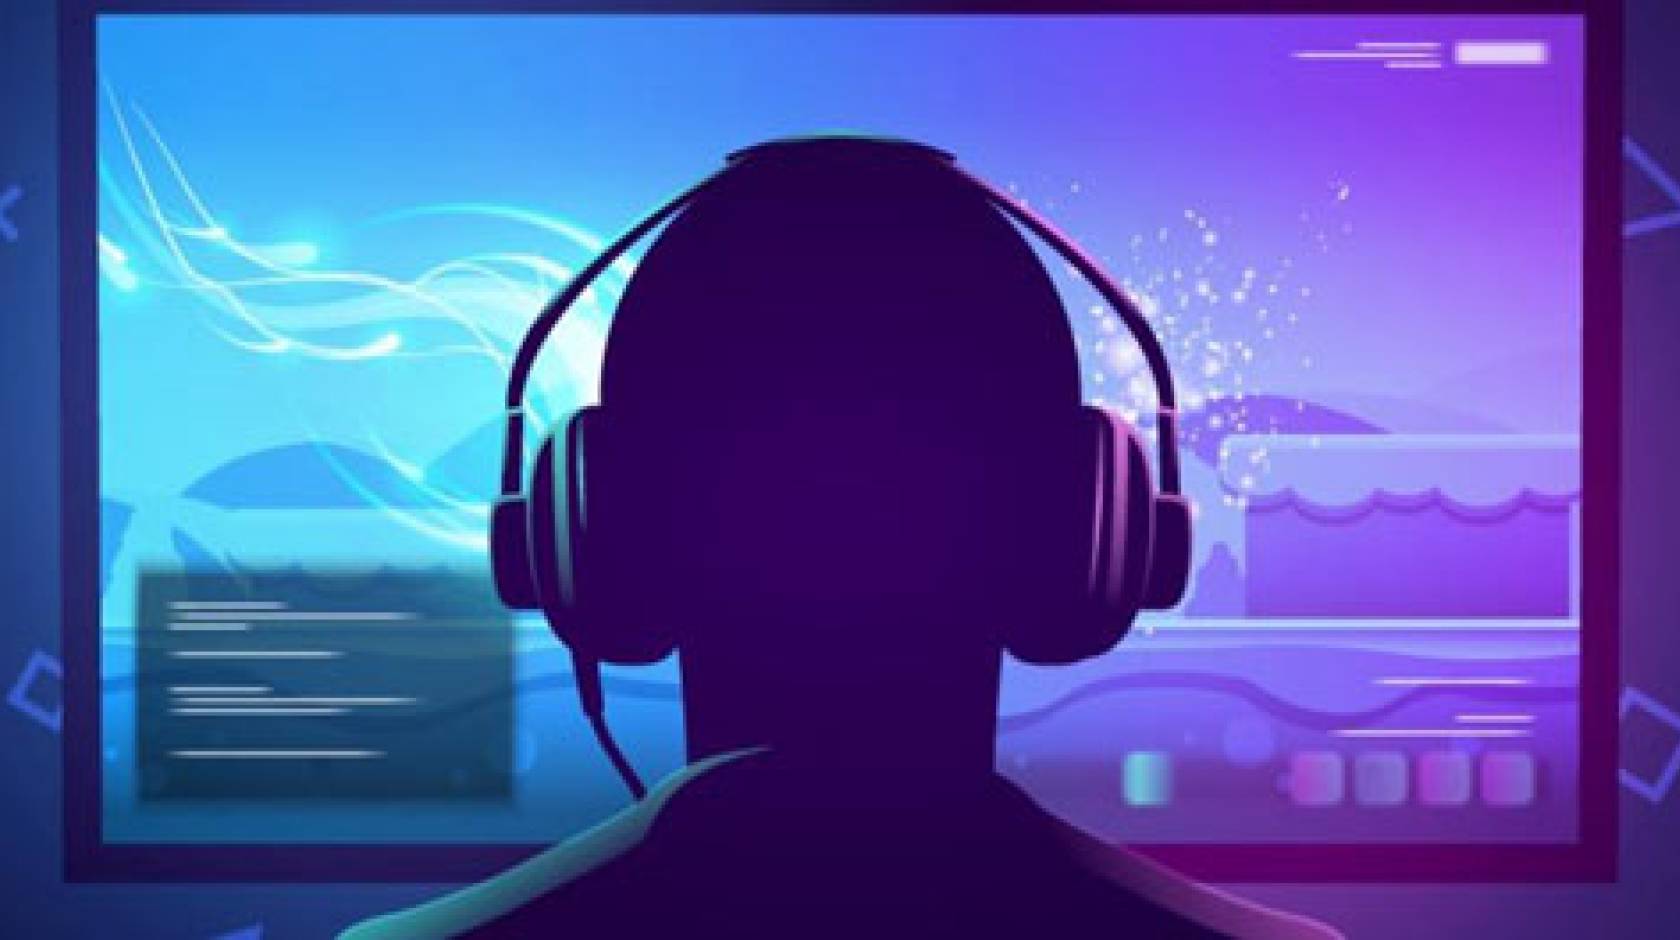 Illustration of person wearing headphones looking at purple screen